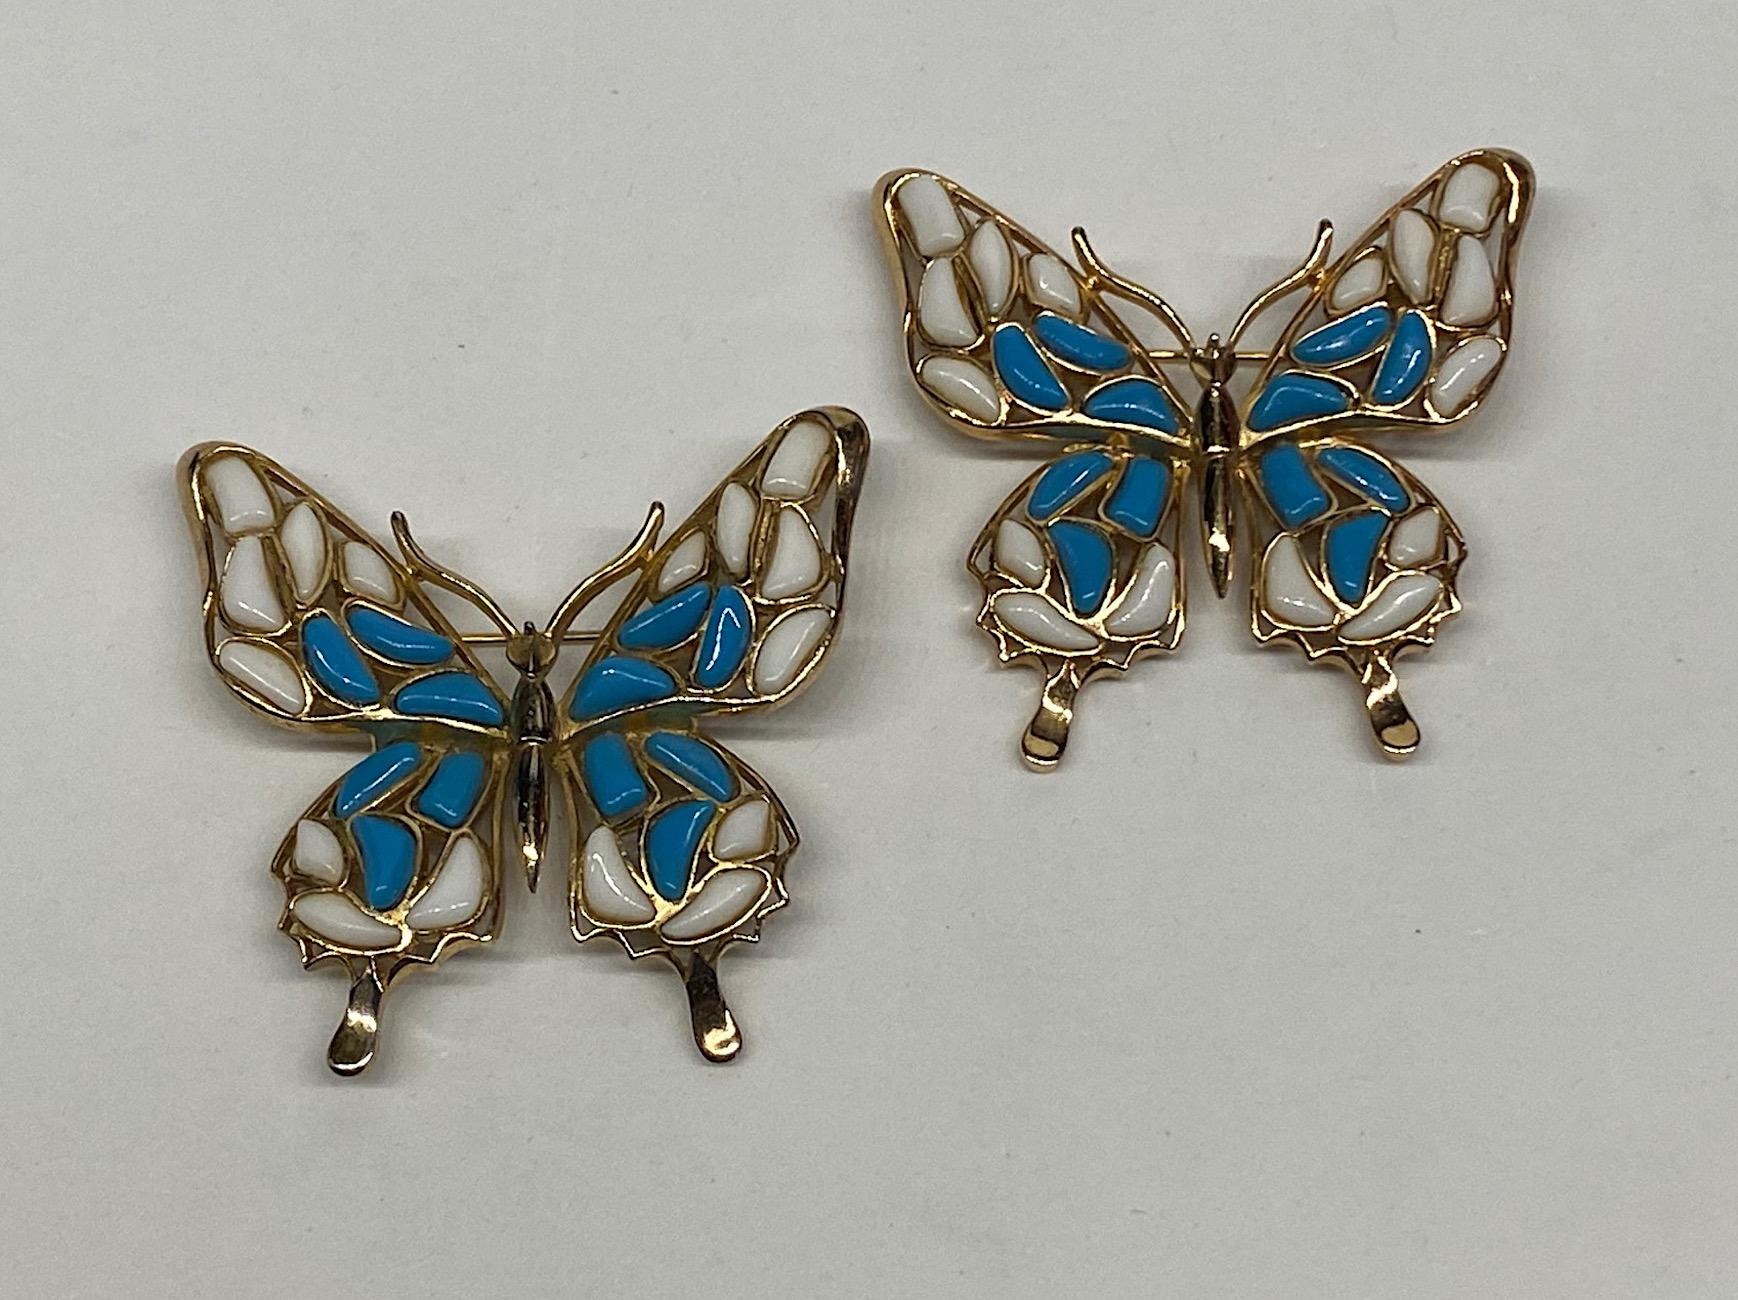 A lovely pair of Trifari butterfly brooches from the 1966 Modern Mosaic line. Each butterfly is hand set with multi shape and size stones in white and turquoise opaque glass. A brooch measures 2 inches wide, 2 inches high and .25 of an inch deep,